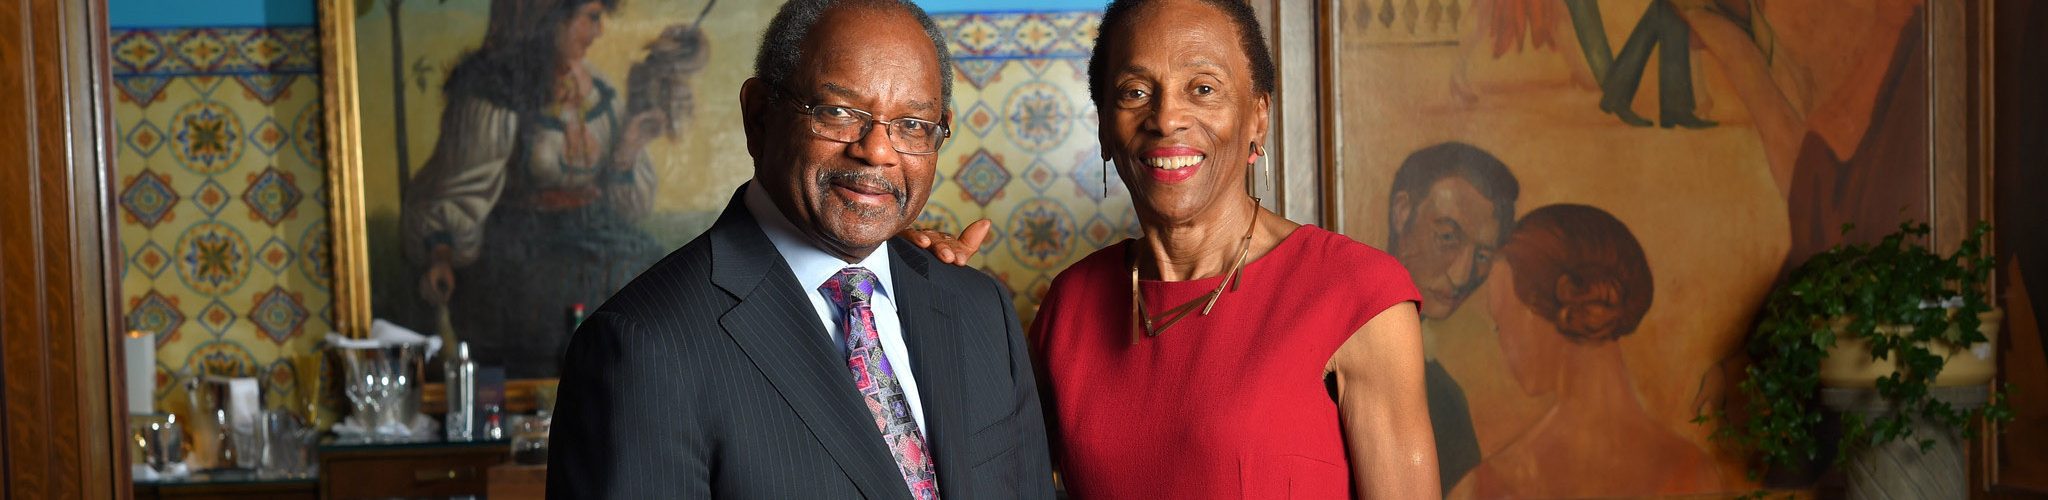 The charitable efforts of Eddie and Sylvia Brown aim to invest in the education of African American youths while also spurring support from Black philanthropists.